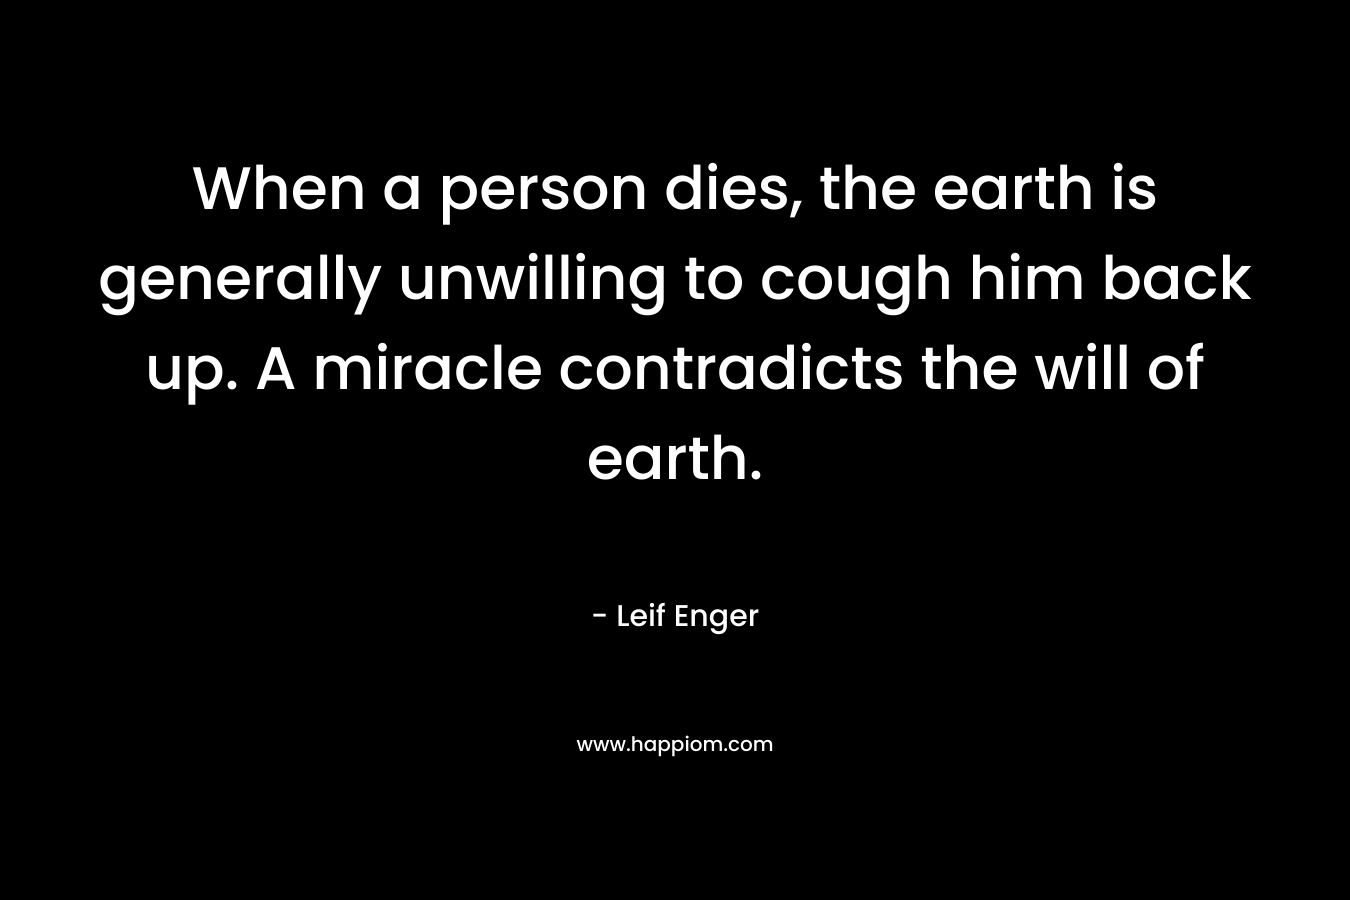 When a person dies, the earth is generally unwilling to cough him back up. A miracle contradicts the will of earth.